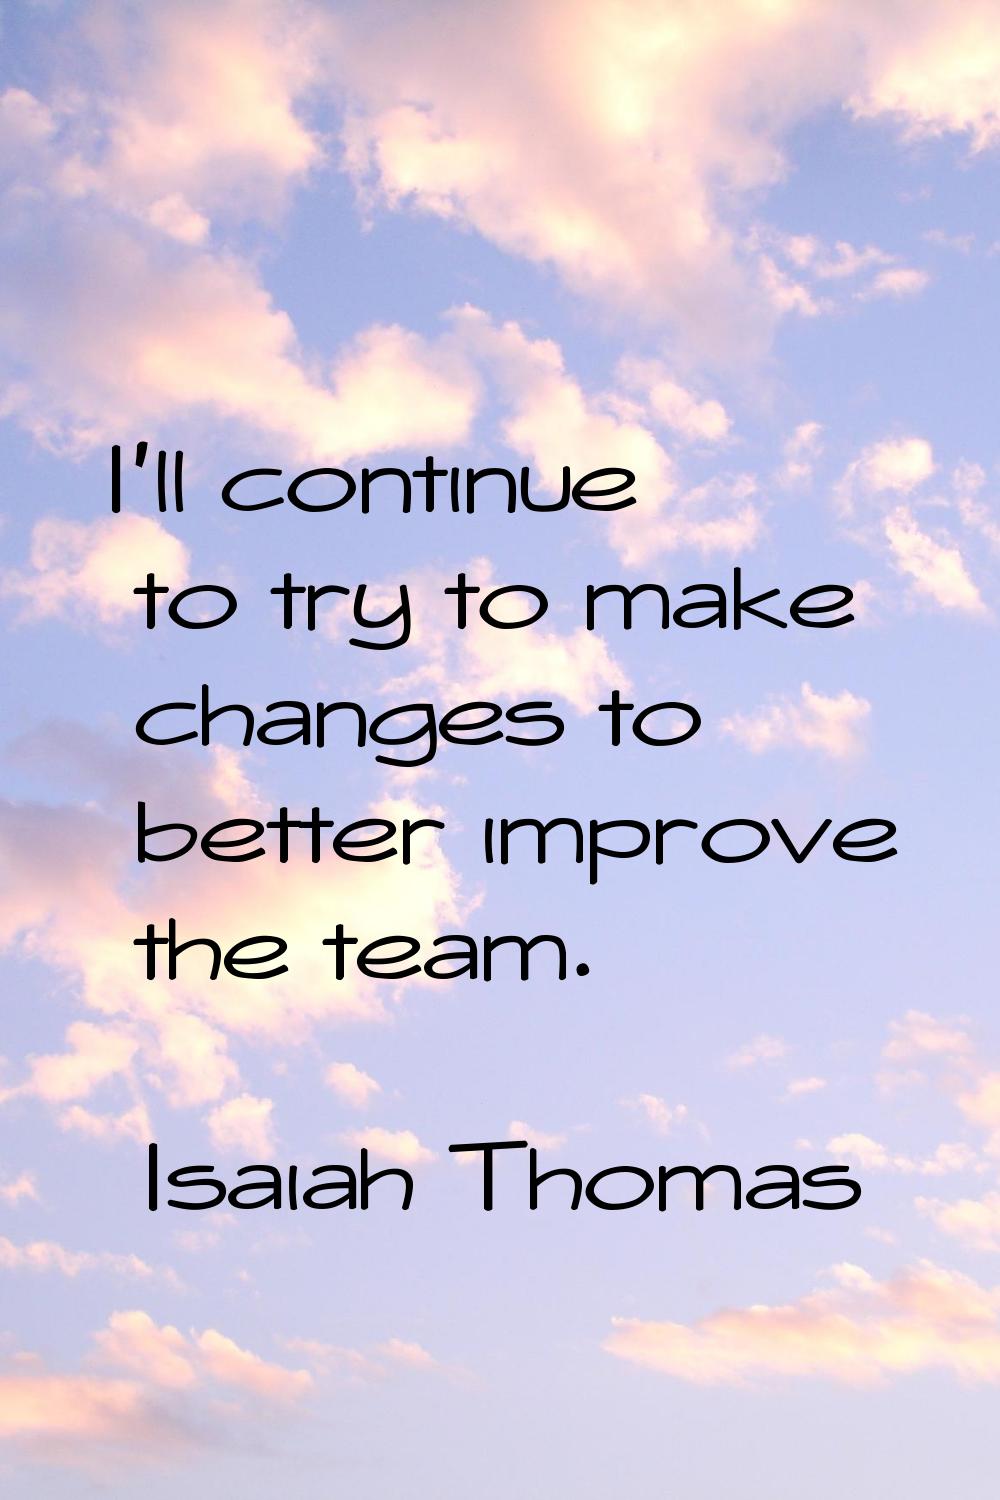 I'll continue to try to make changes to better improve the team.